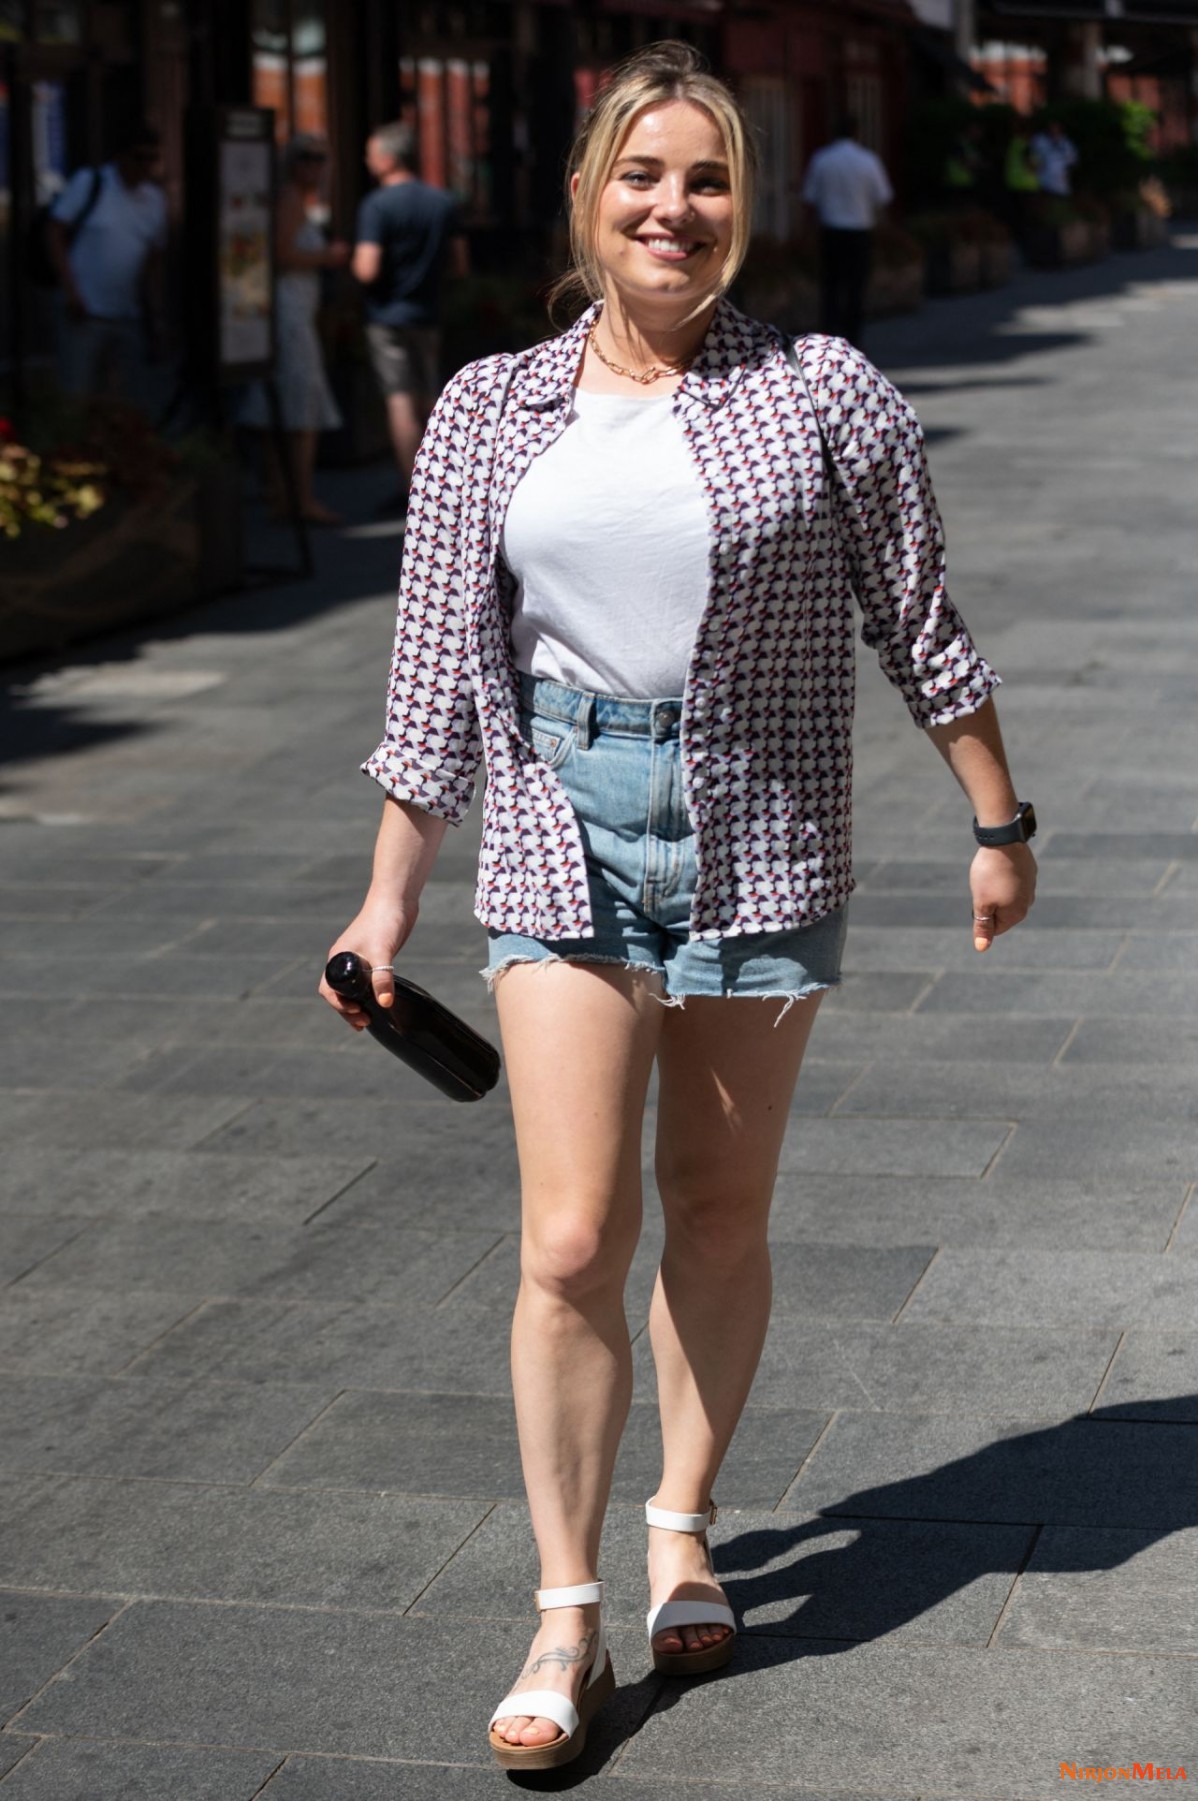 sian-welby-out-in-london-06-16-2021-0c6e1824be799b042.jpg